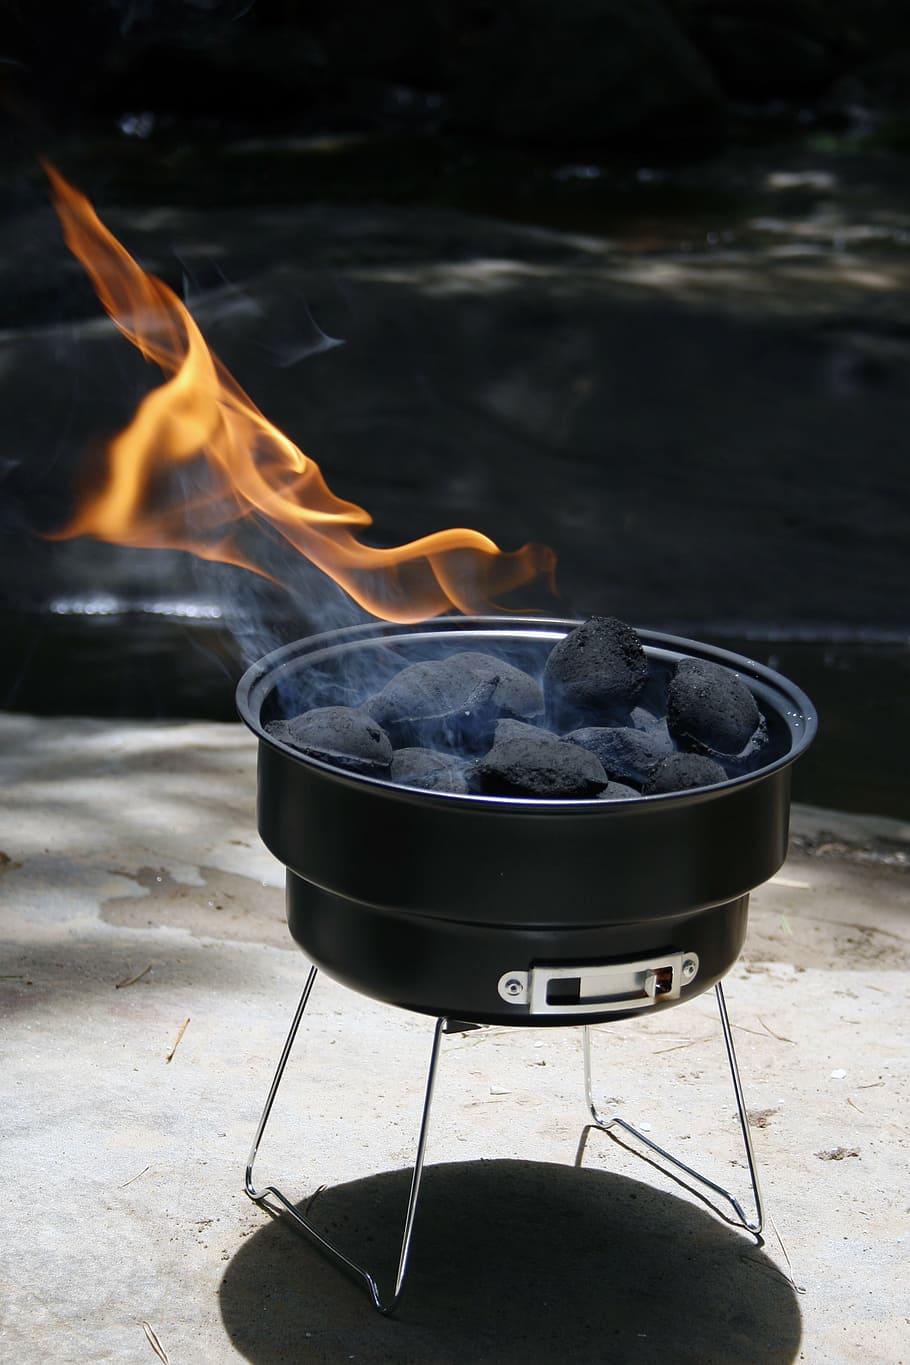 bbq, charcoal, flames, smoke, picnic, barbeque, fire - Natural Phenomenon, flame, heat - Temperature, cooking